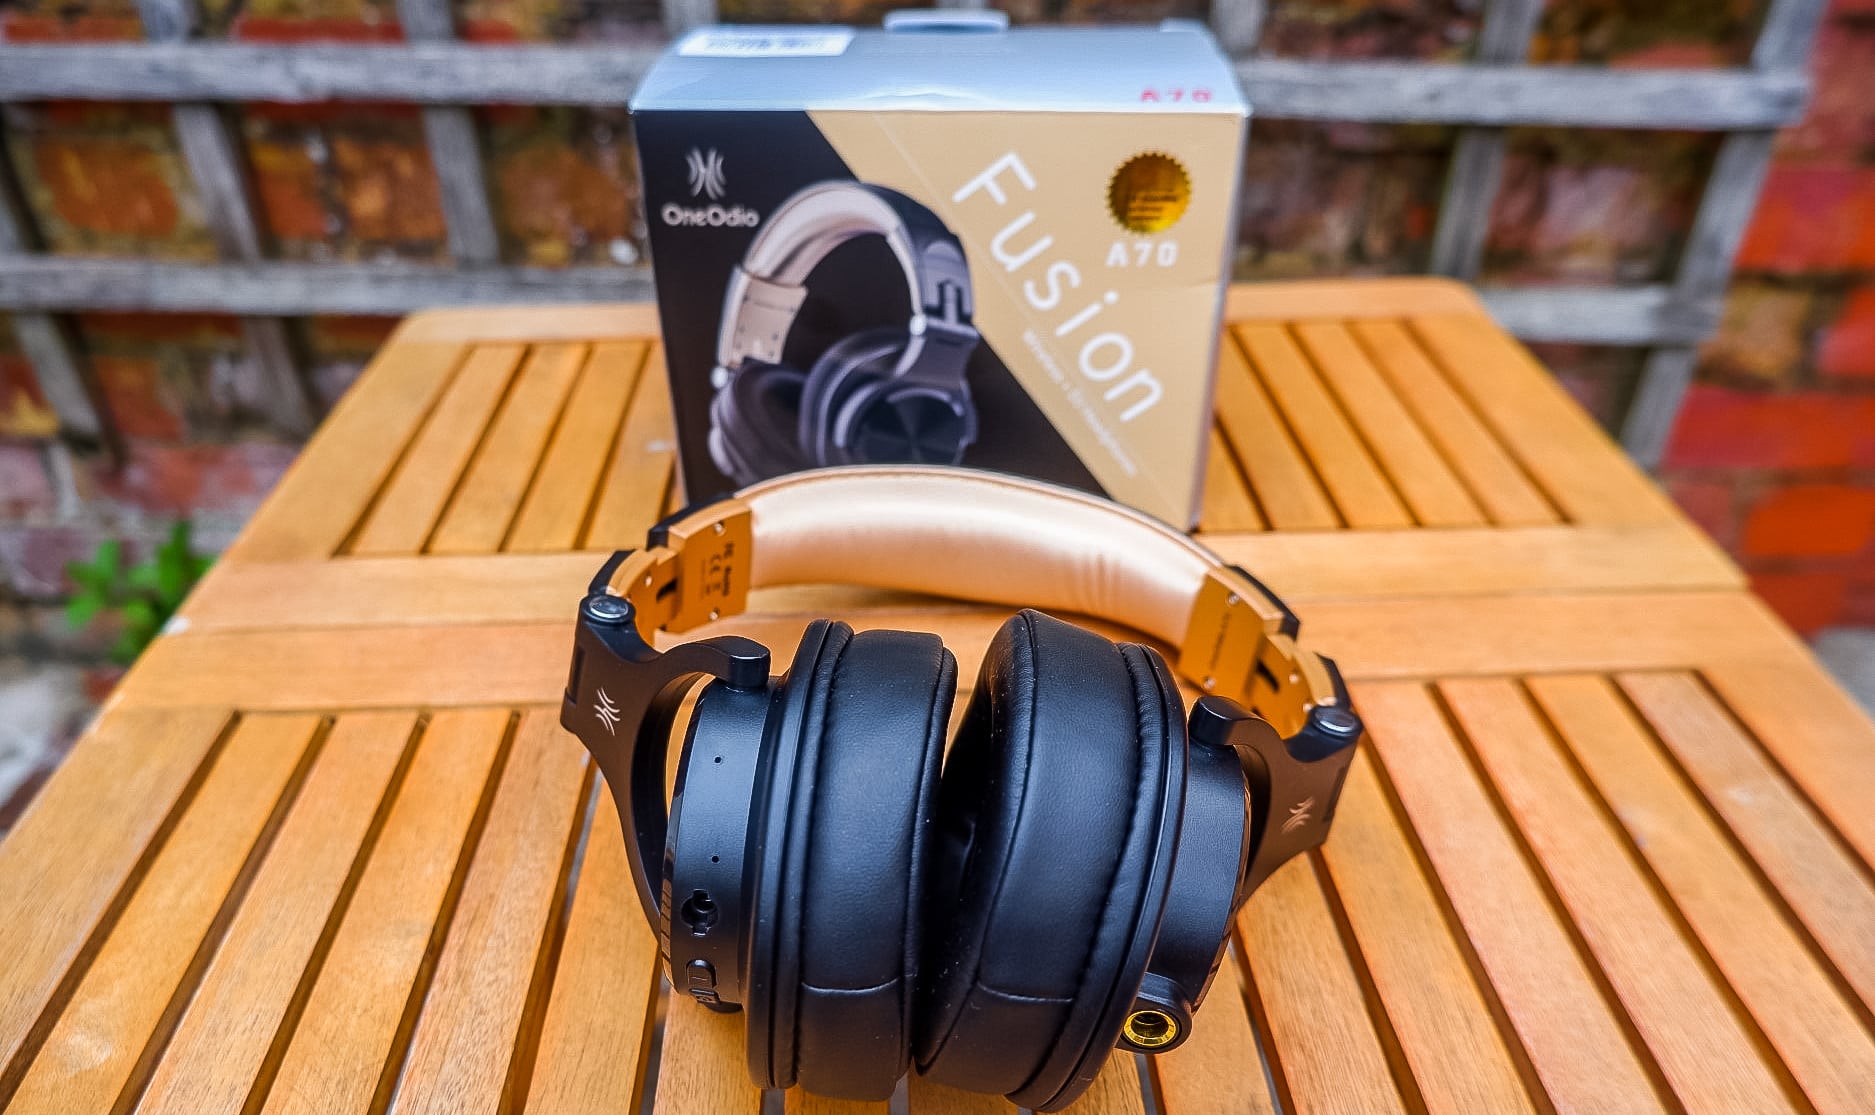 OneOdio Fusion A70 Bluetooth & Wired Headphones Review – Budget bass-heavy headphones with 6.35mm & 3.5mm jack